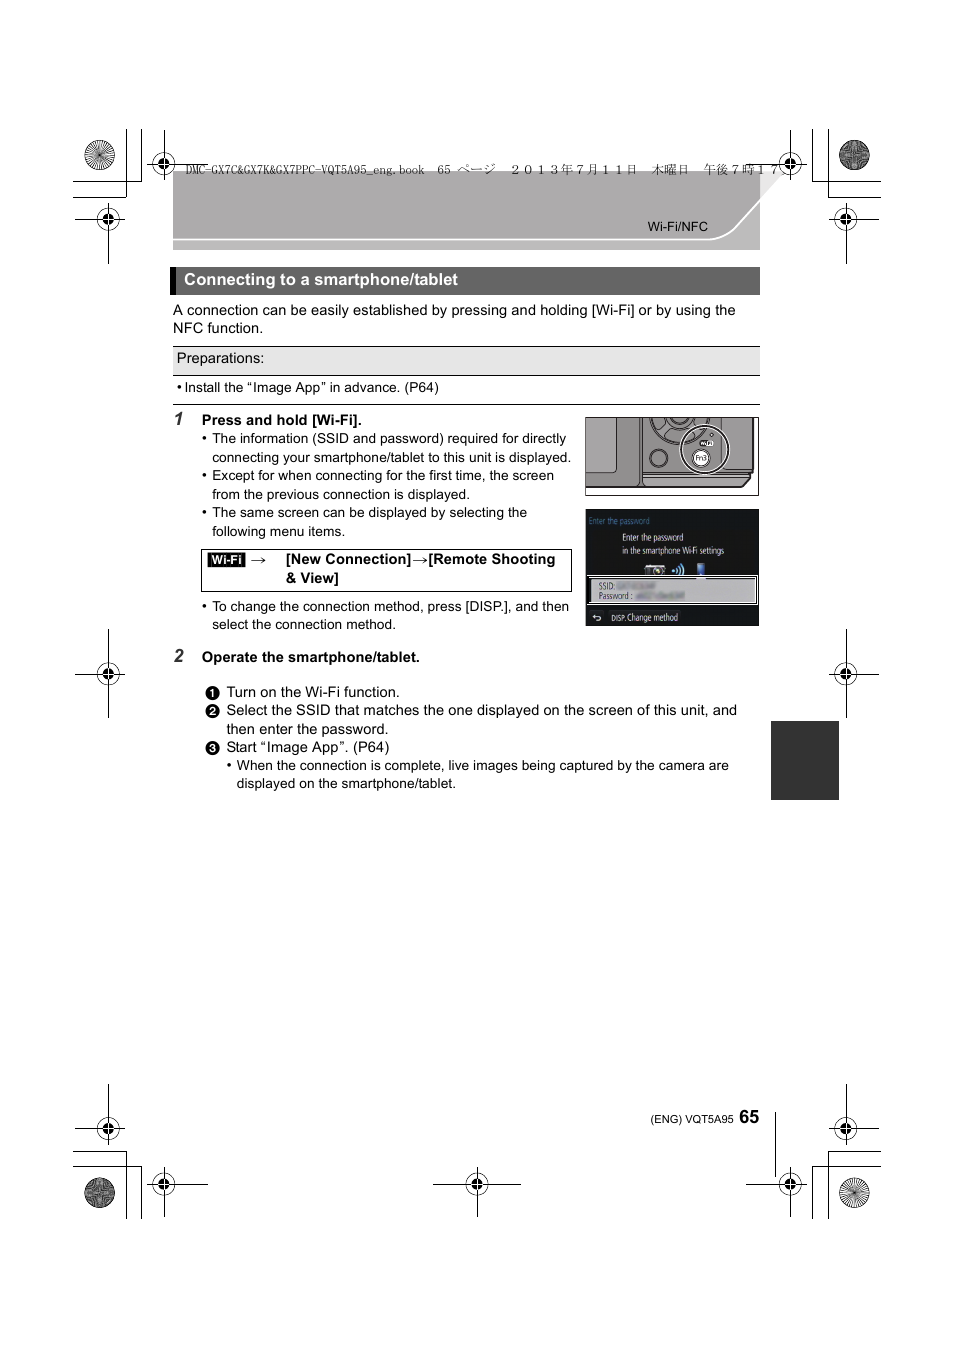 Connecting to a smartphone/tablet | Panasonic DMC-GX7SBODY User Manual | Page 65 / 104